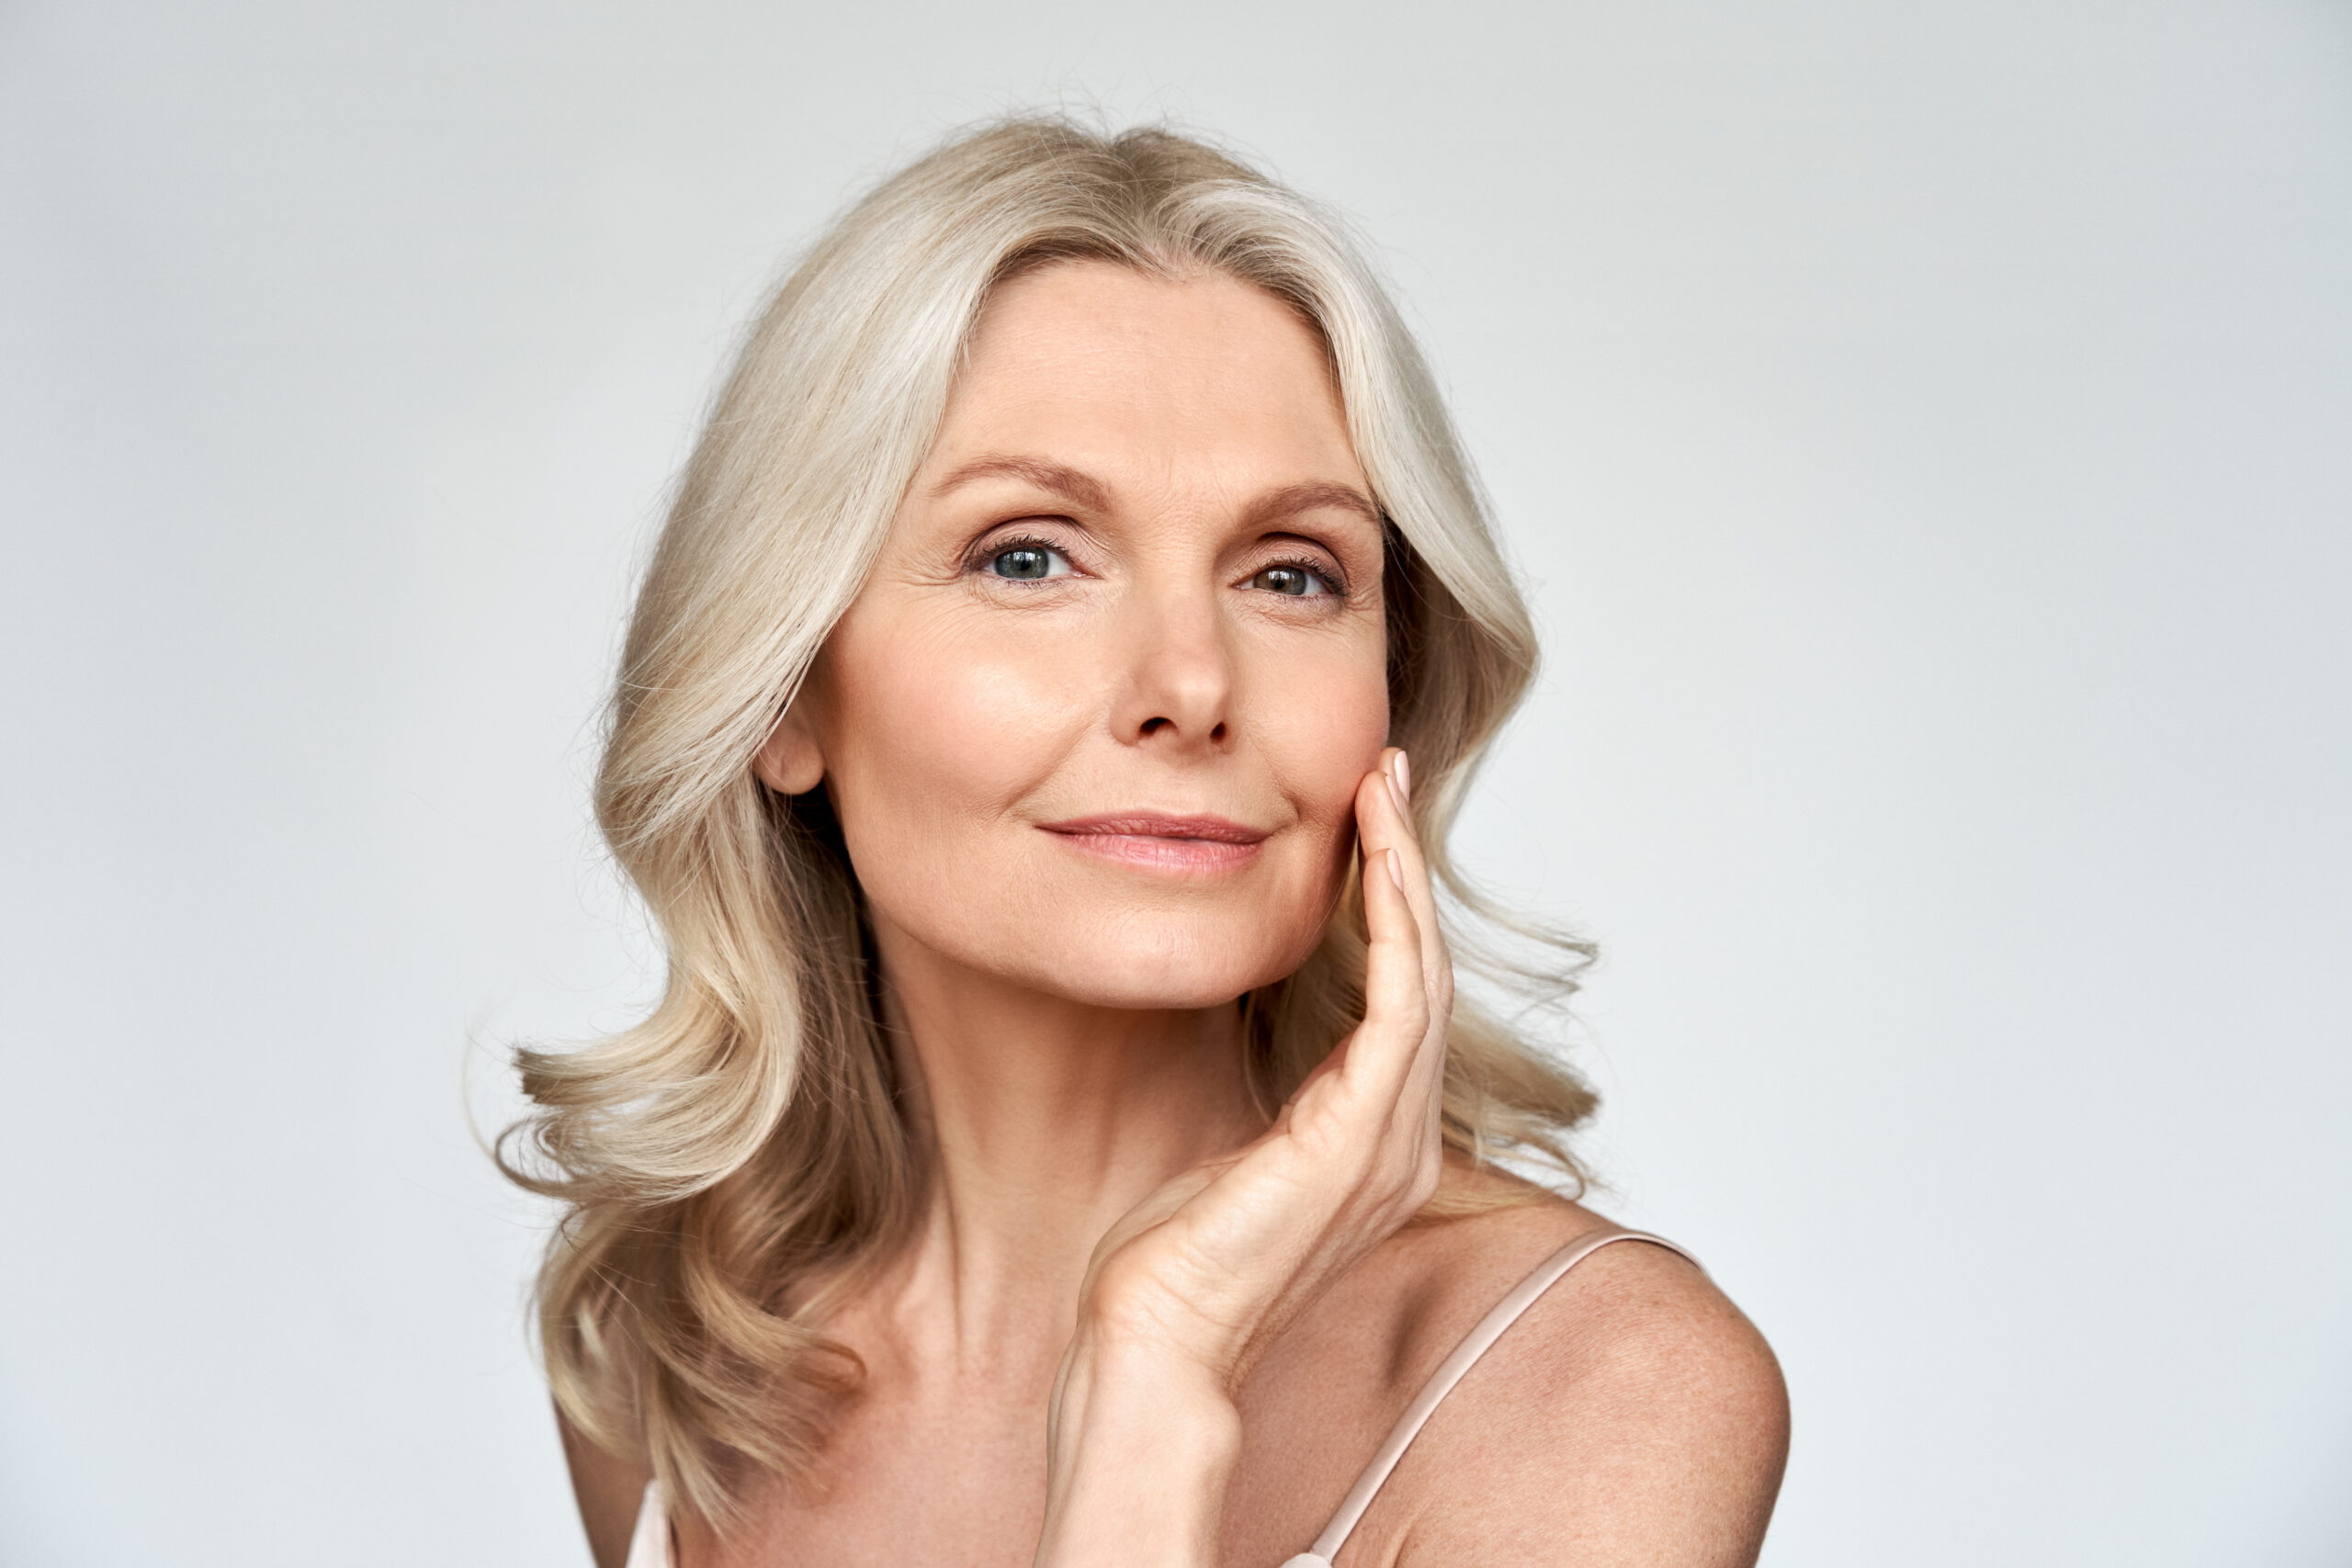  What are the steps involved in administering wrinkle relaxer injections